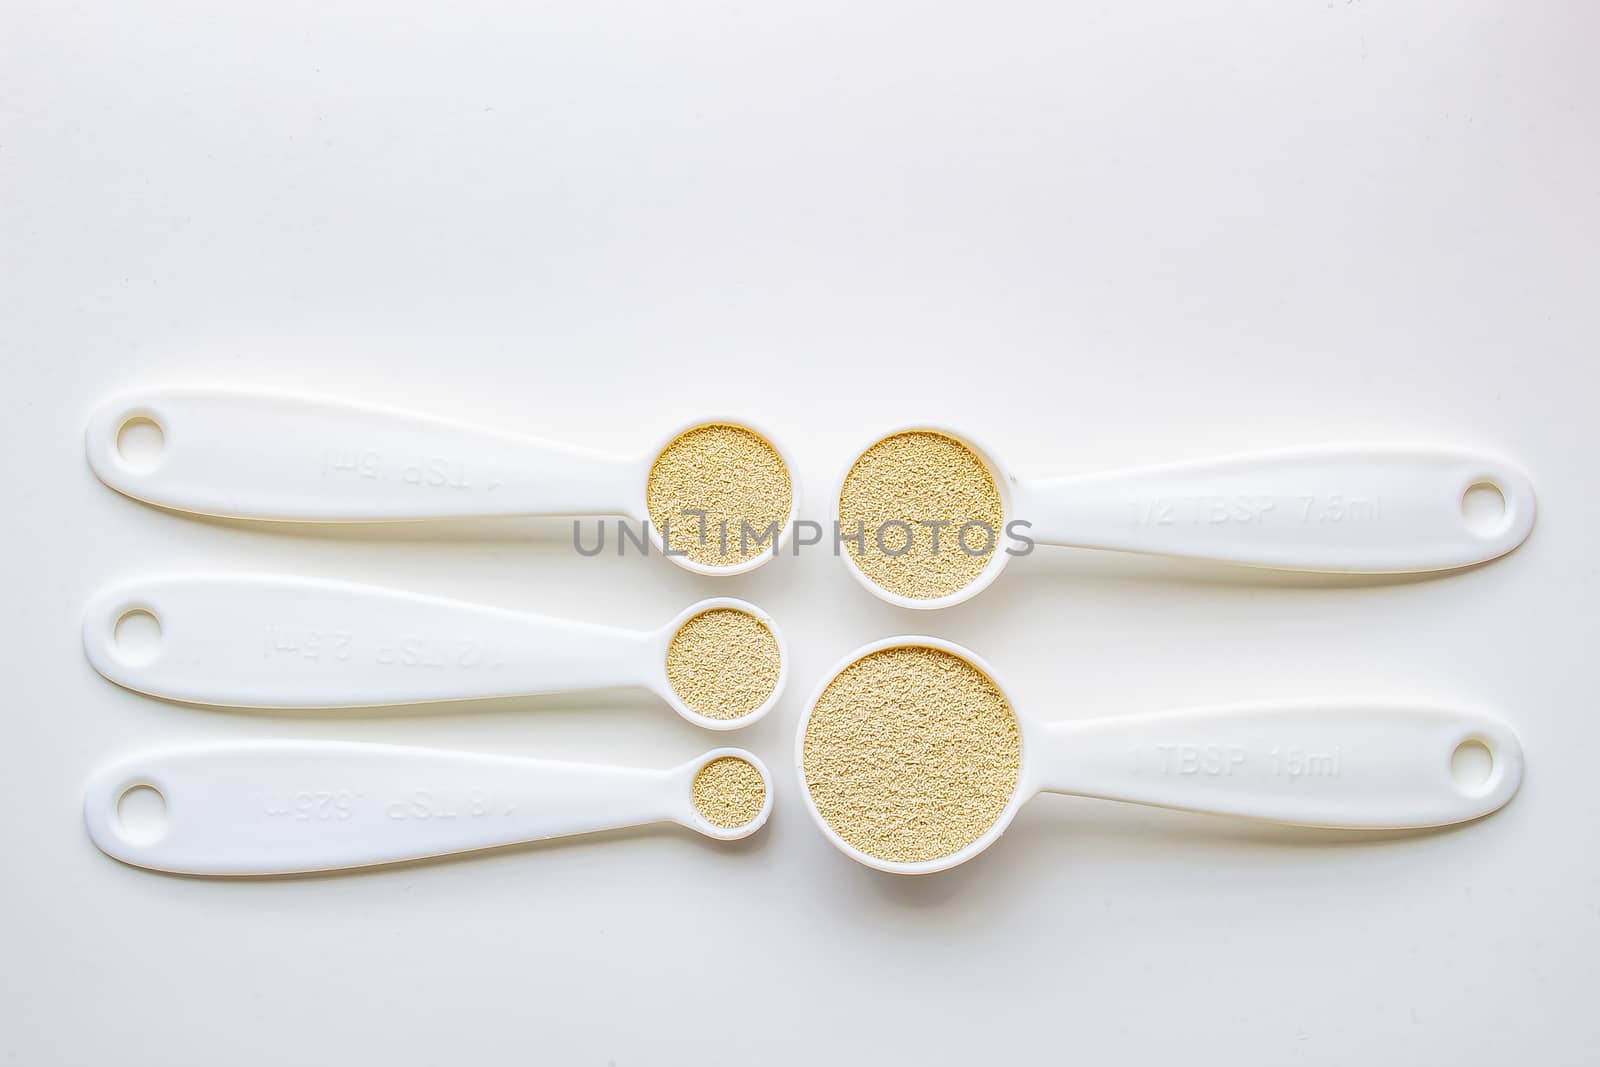 A top general view of some measurement baking spoons with yeast on them